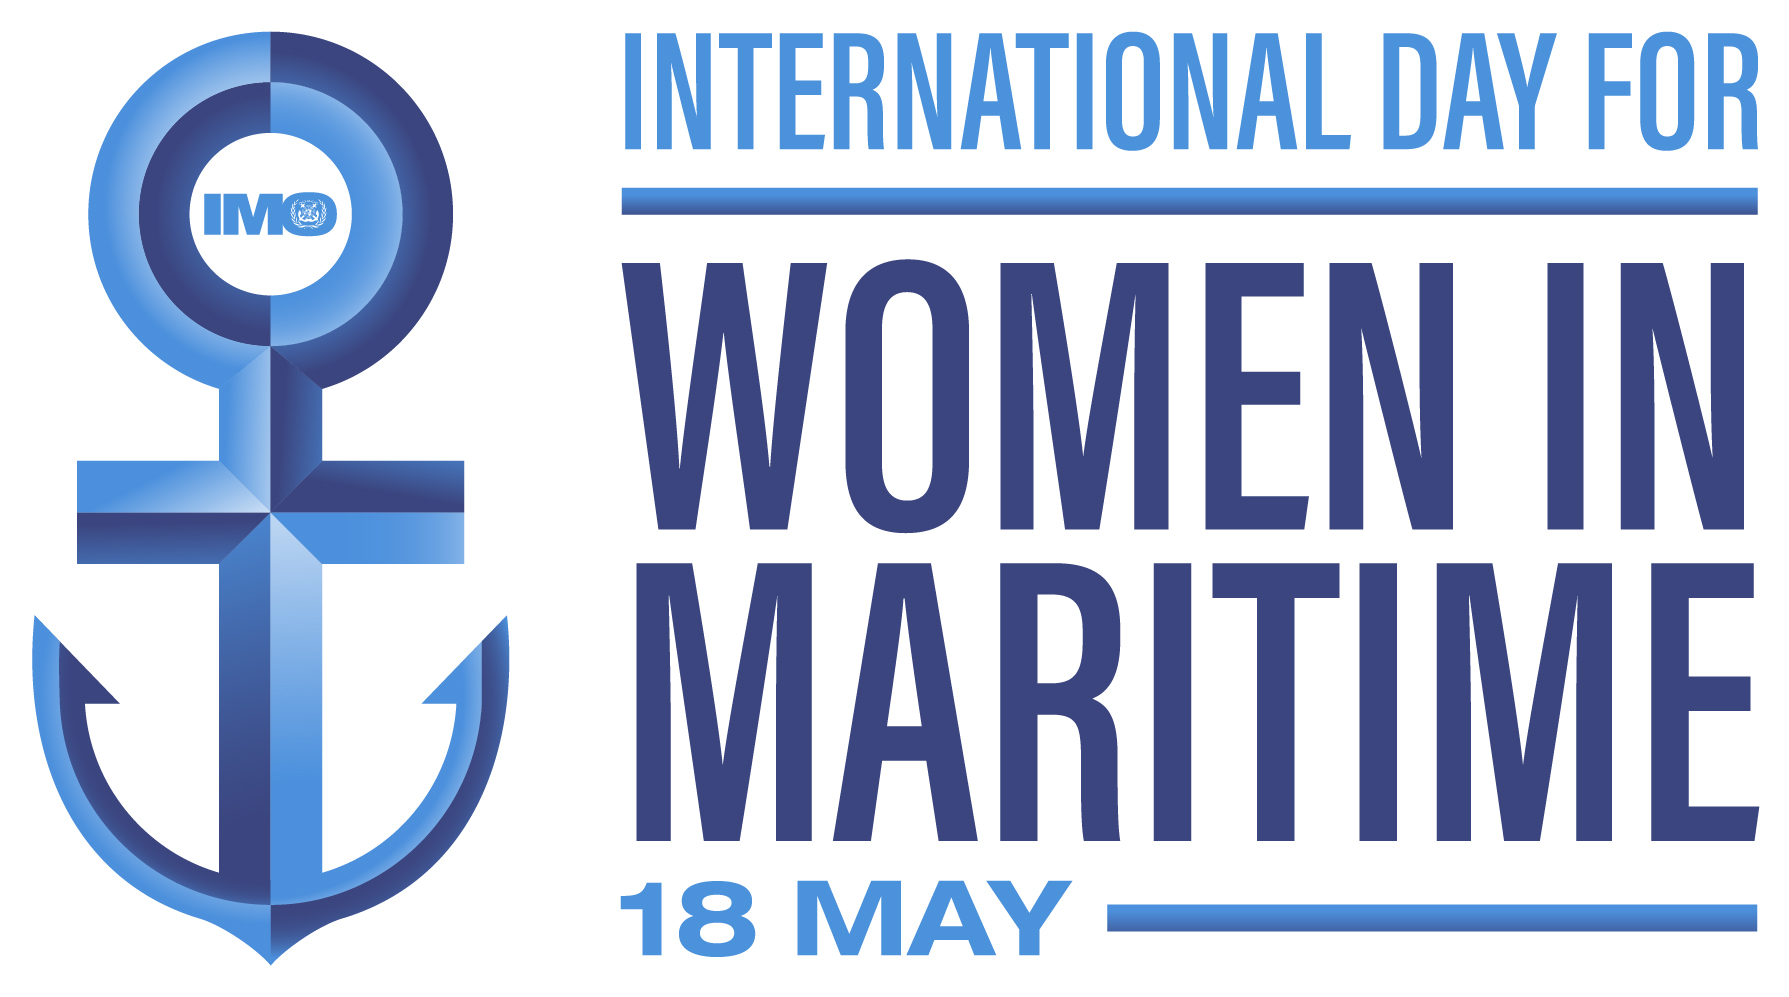 IMO's logo for the International Day for Women in Maritime